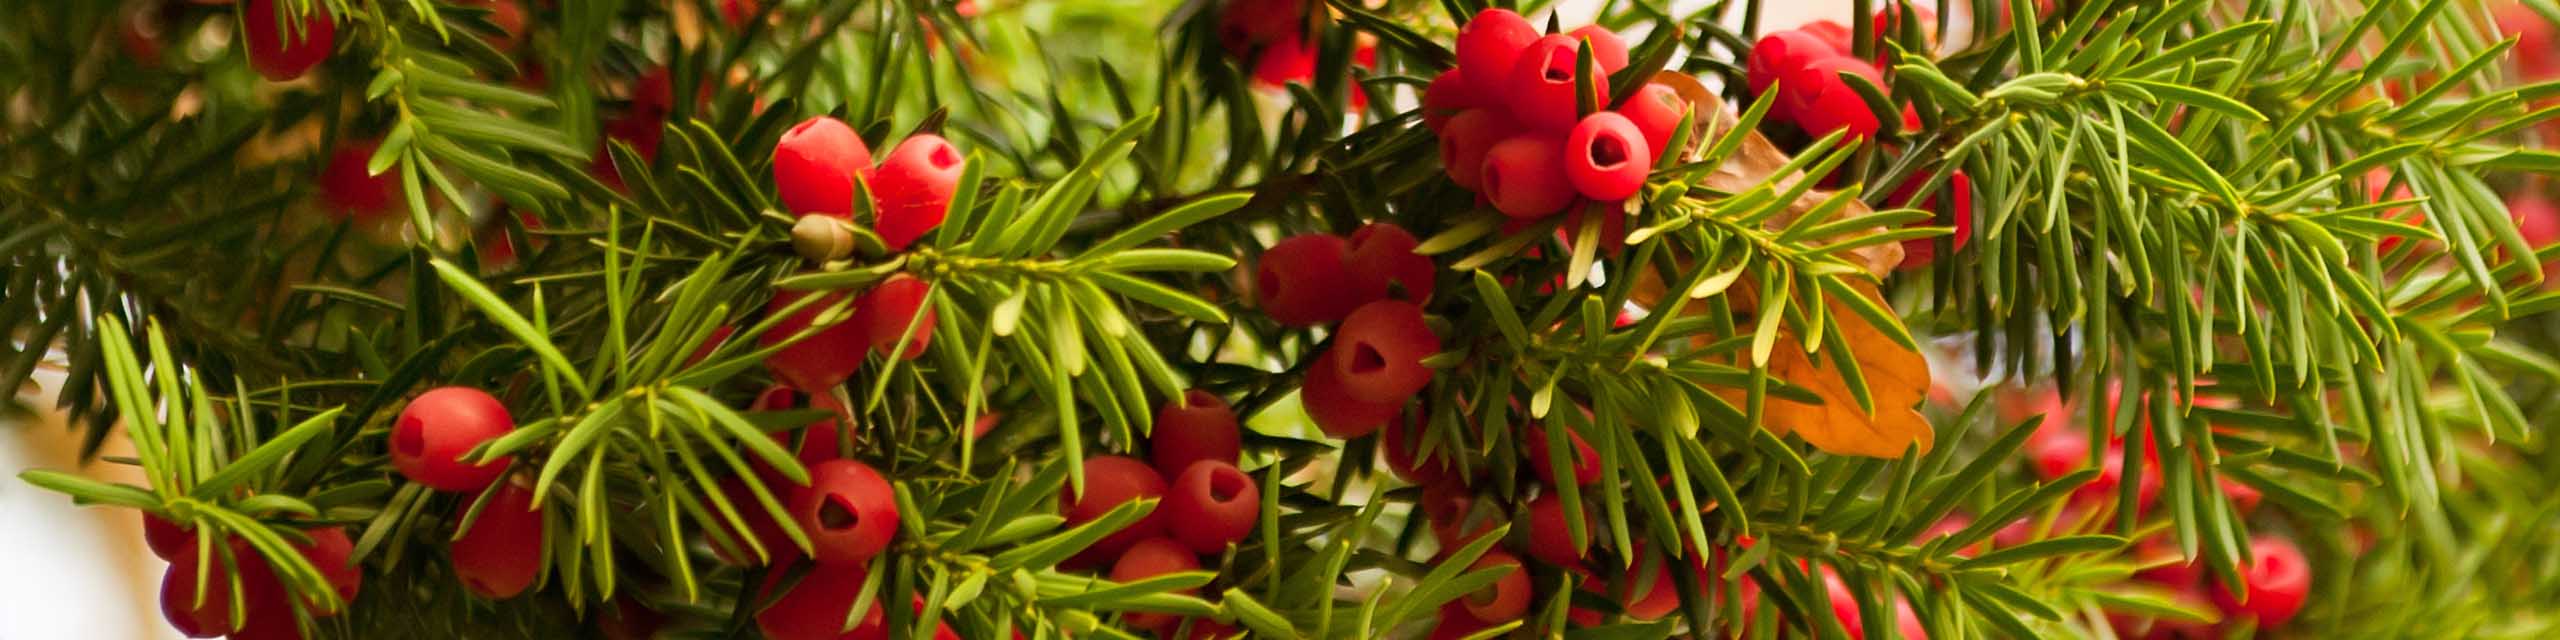 Close up of the needles and red berries of a yew shrub.